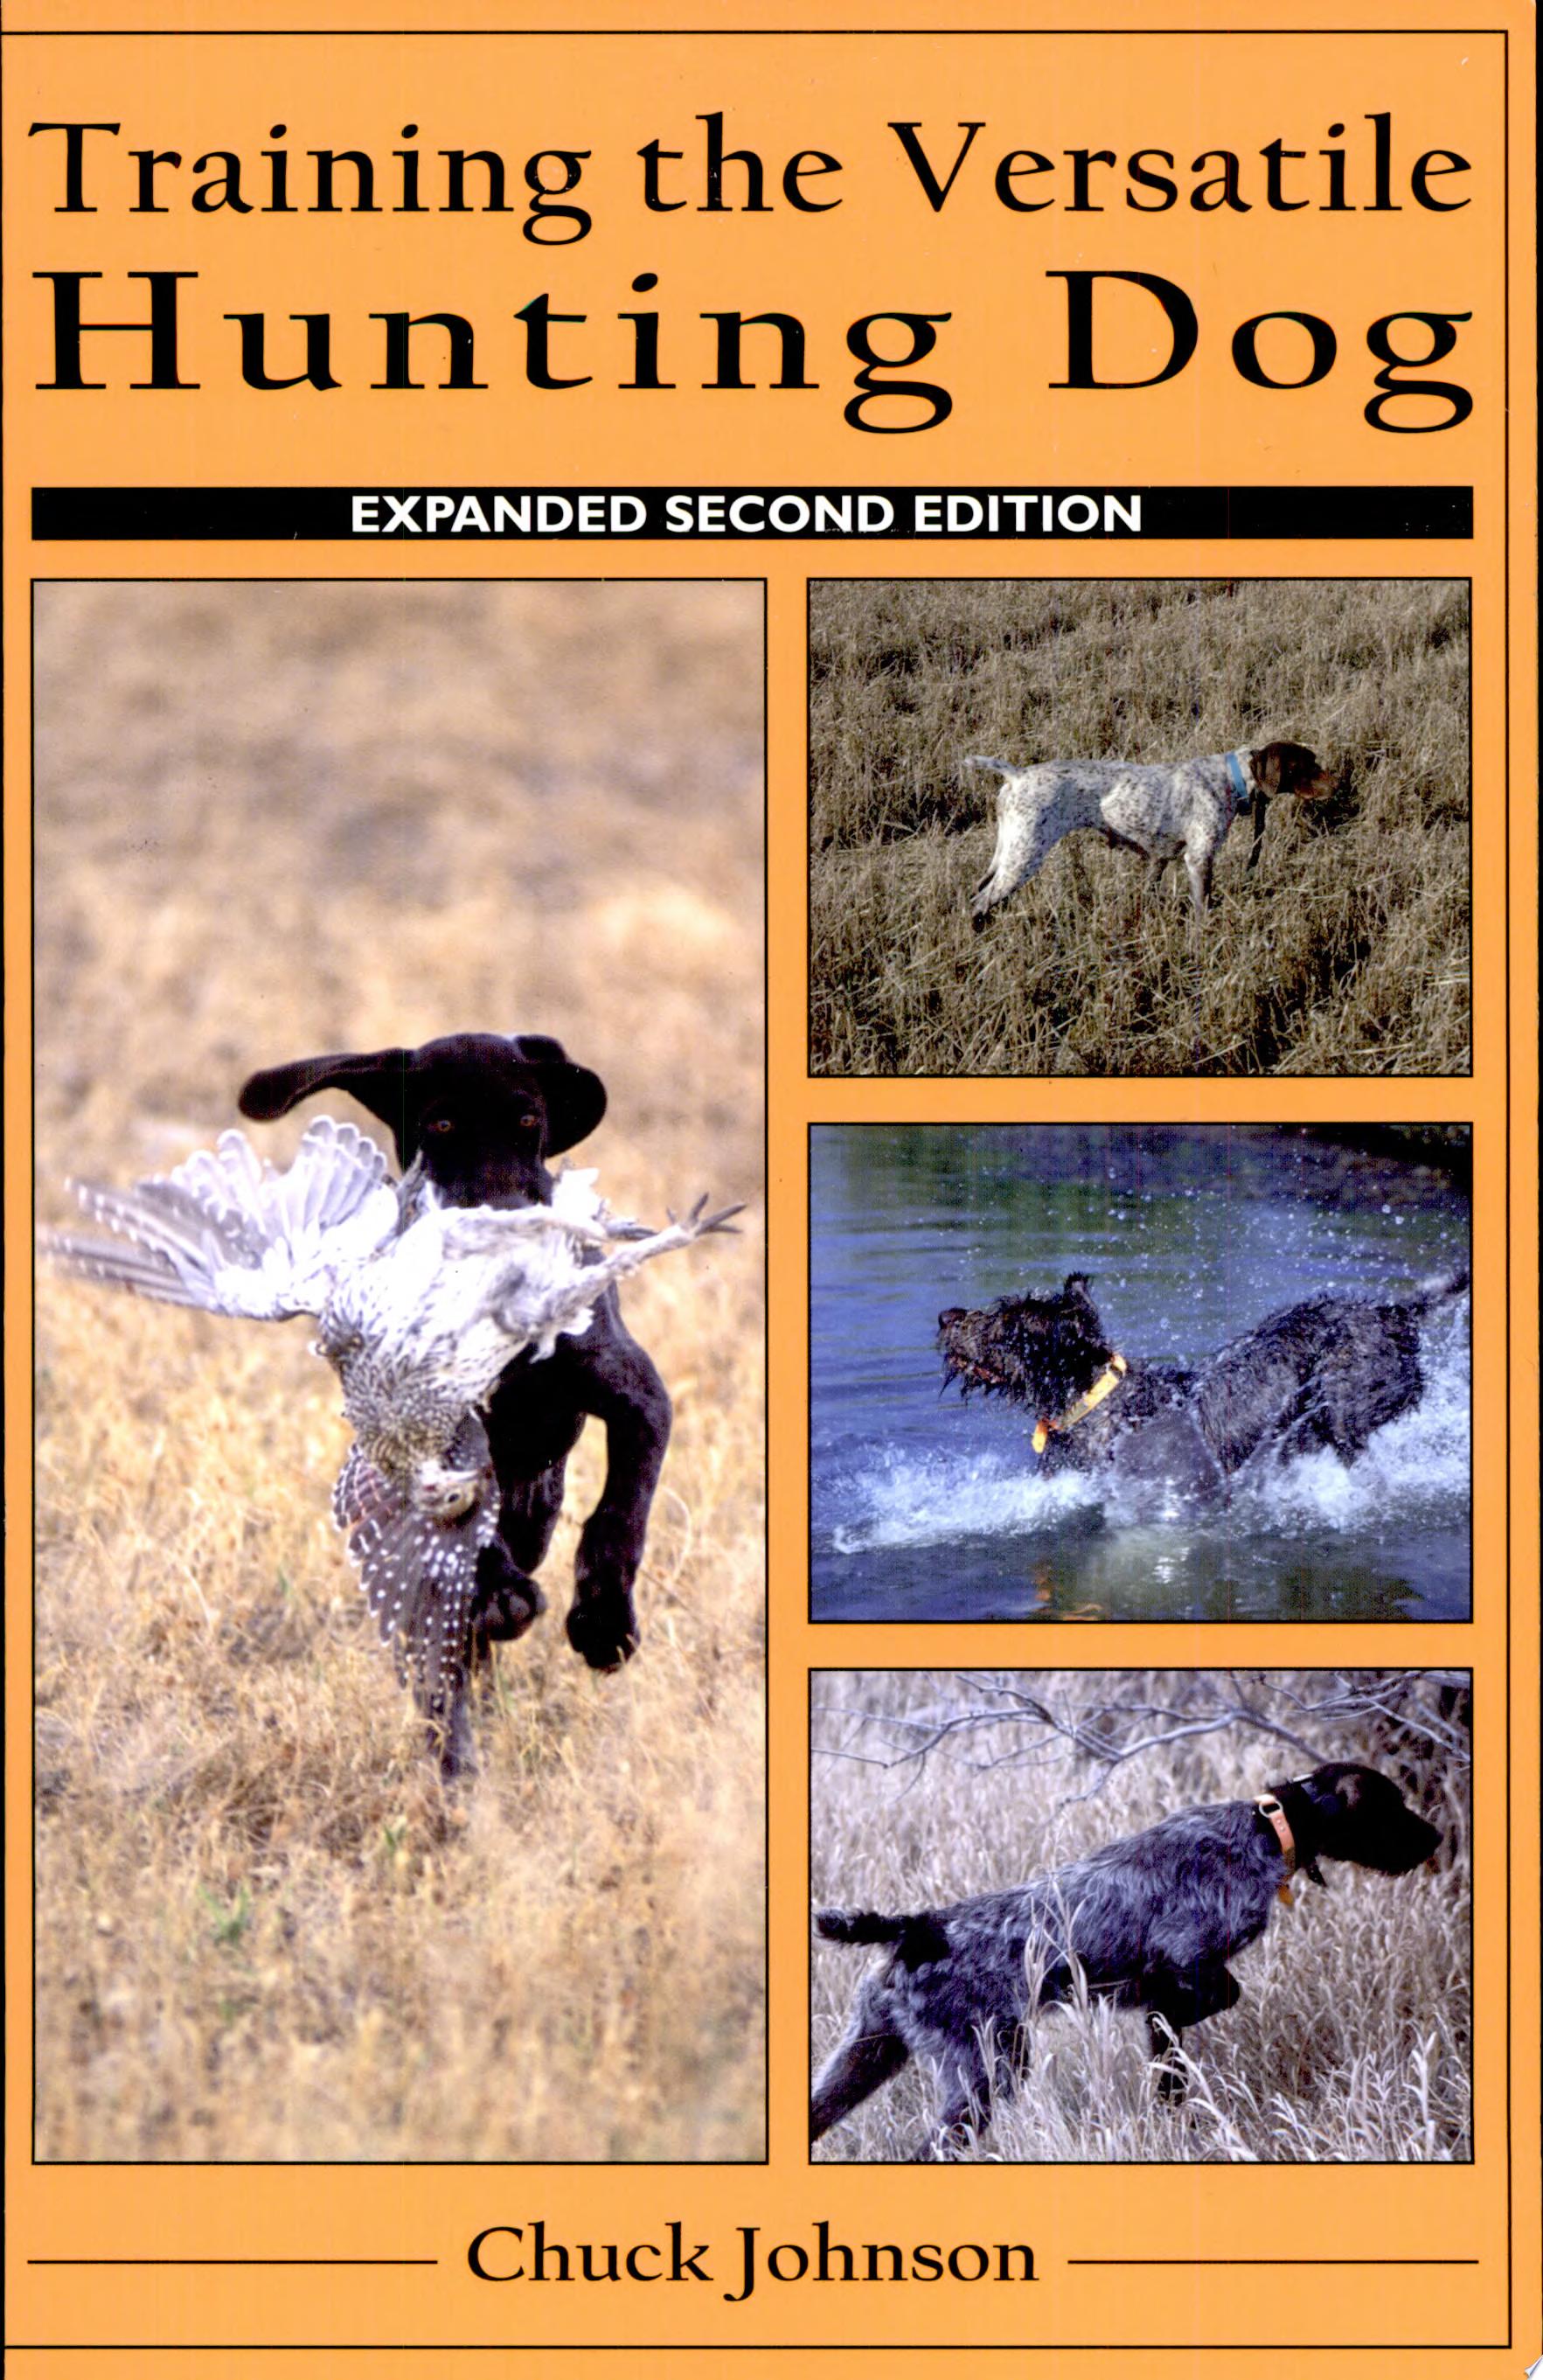 Image for "Training the Versatile Hunting Dog"